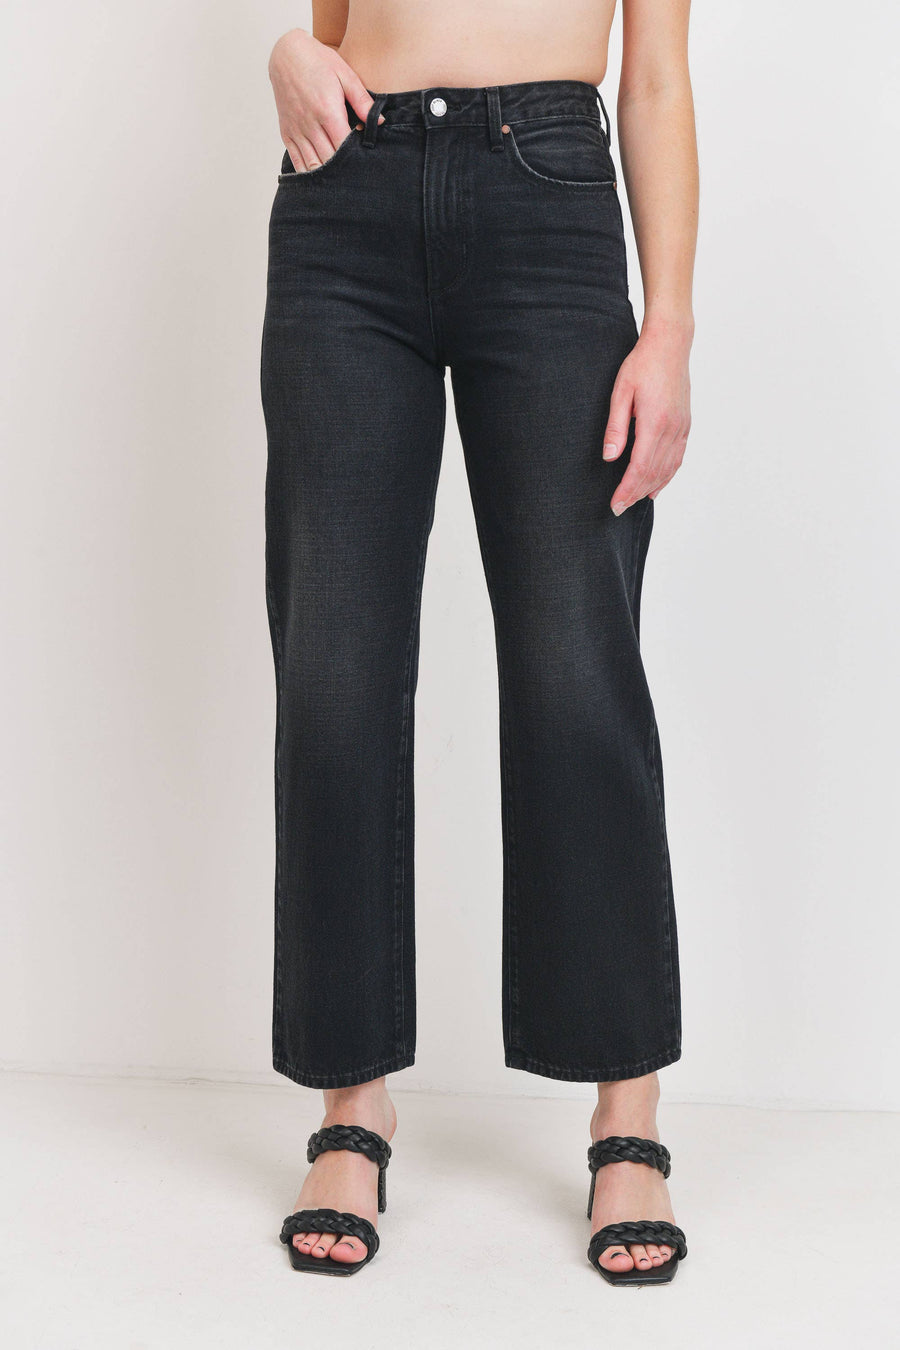 The Classic Dad Jeans by Just Black Denim